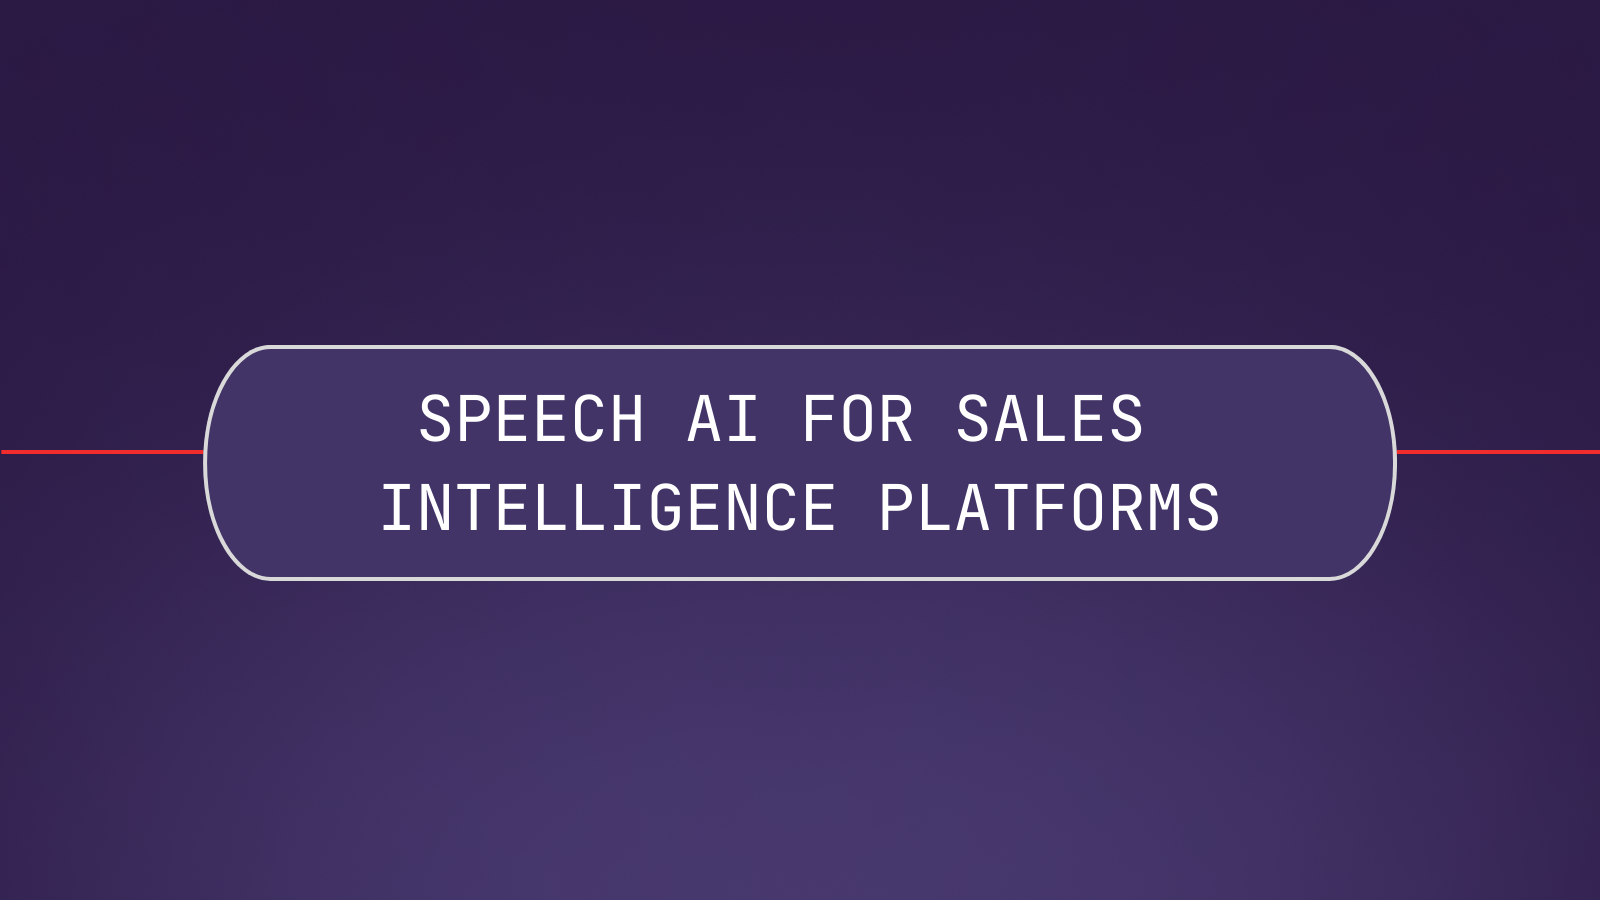 Speech AI for Sales Intelligence Platforms: How to Use AI in 2023